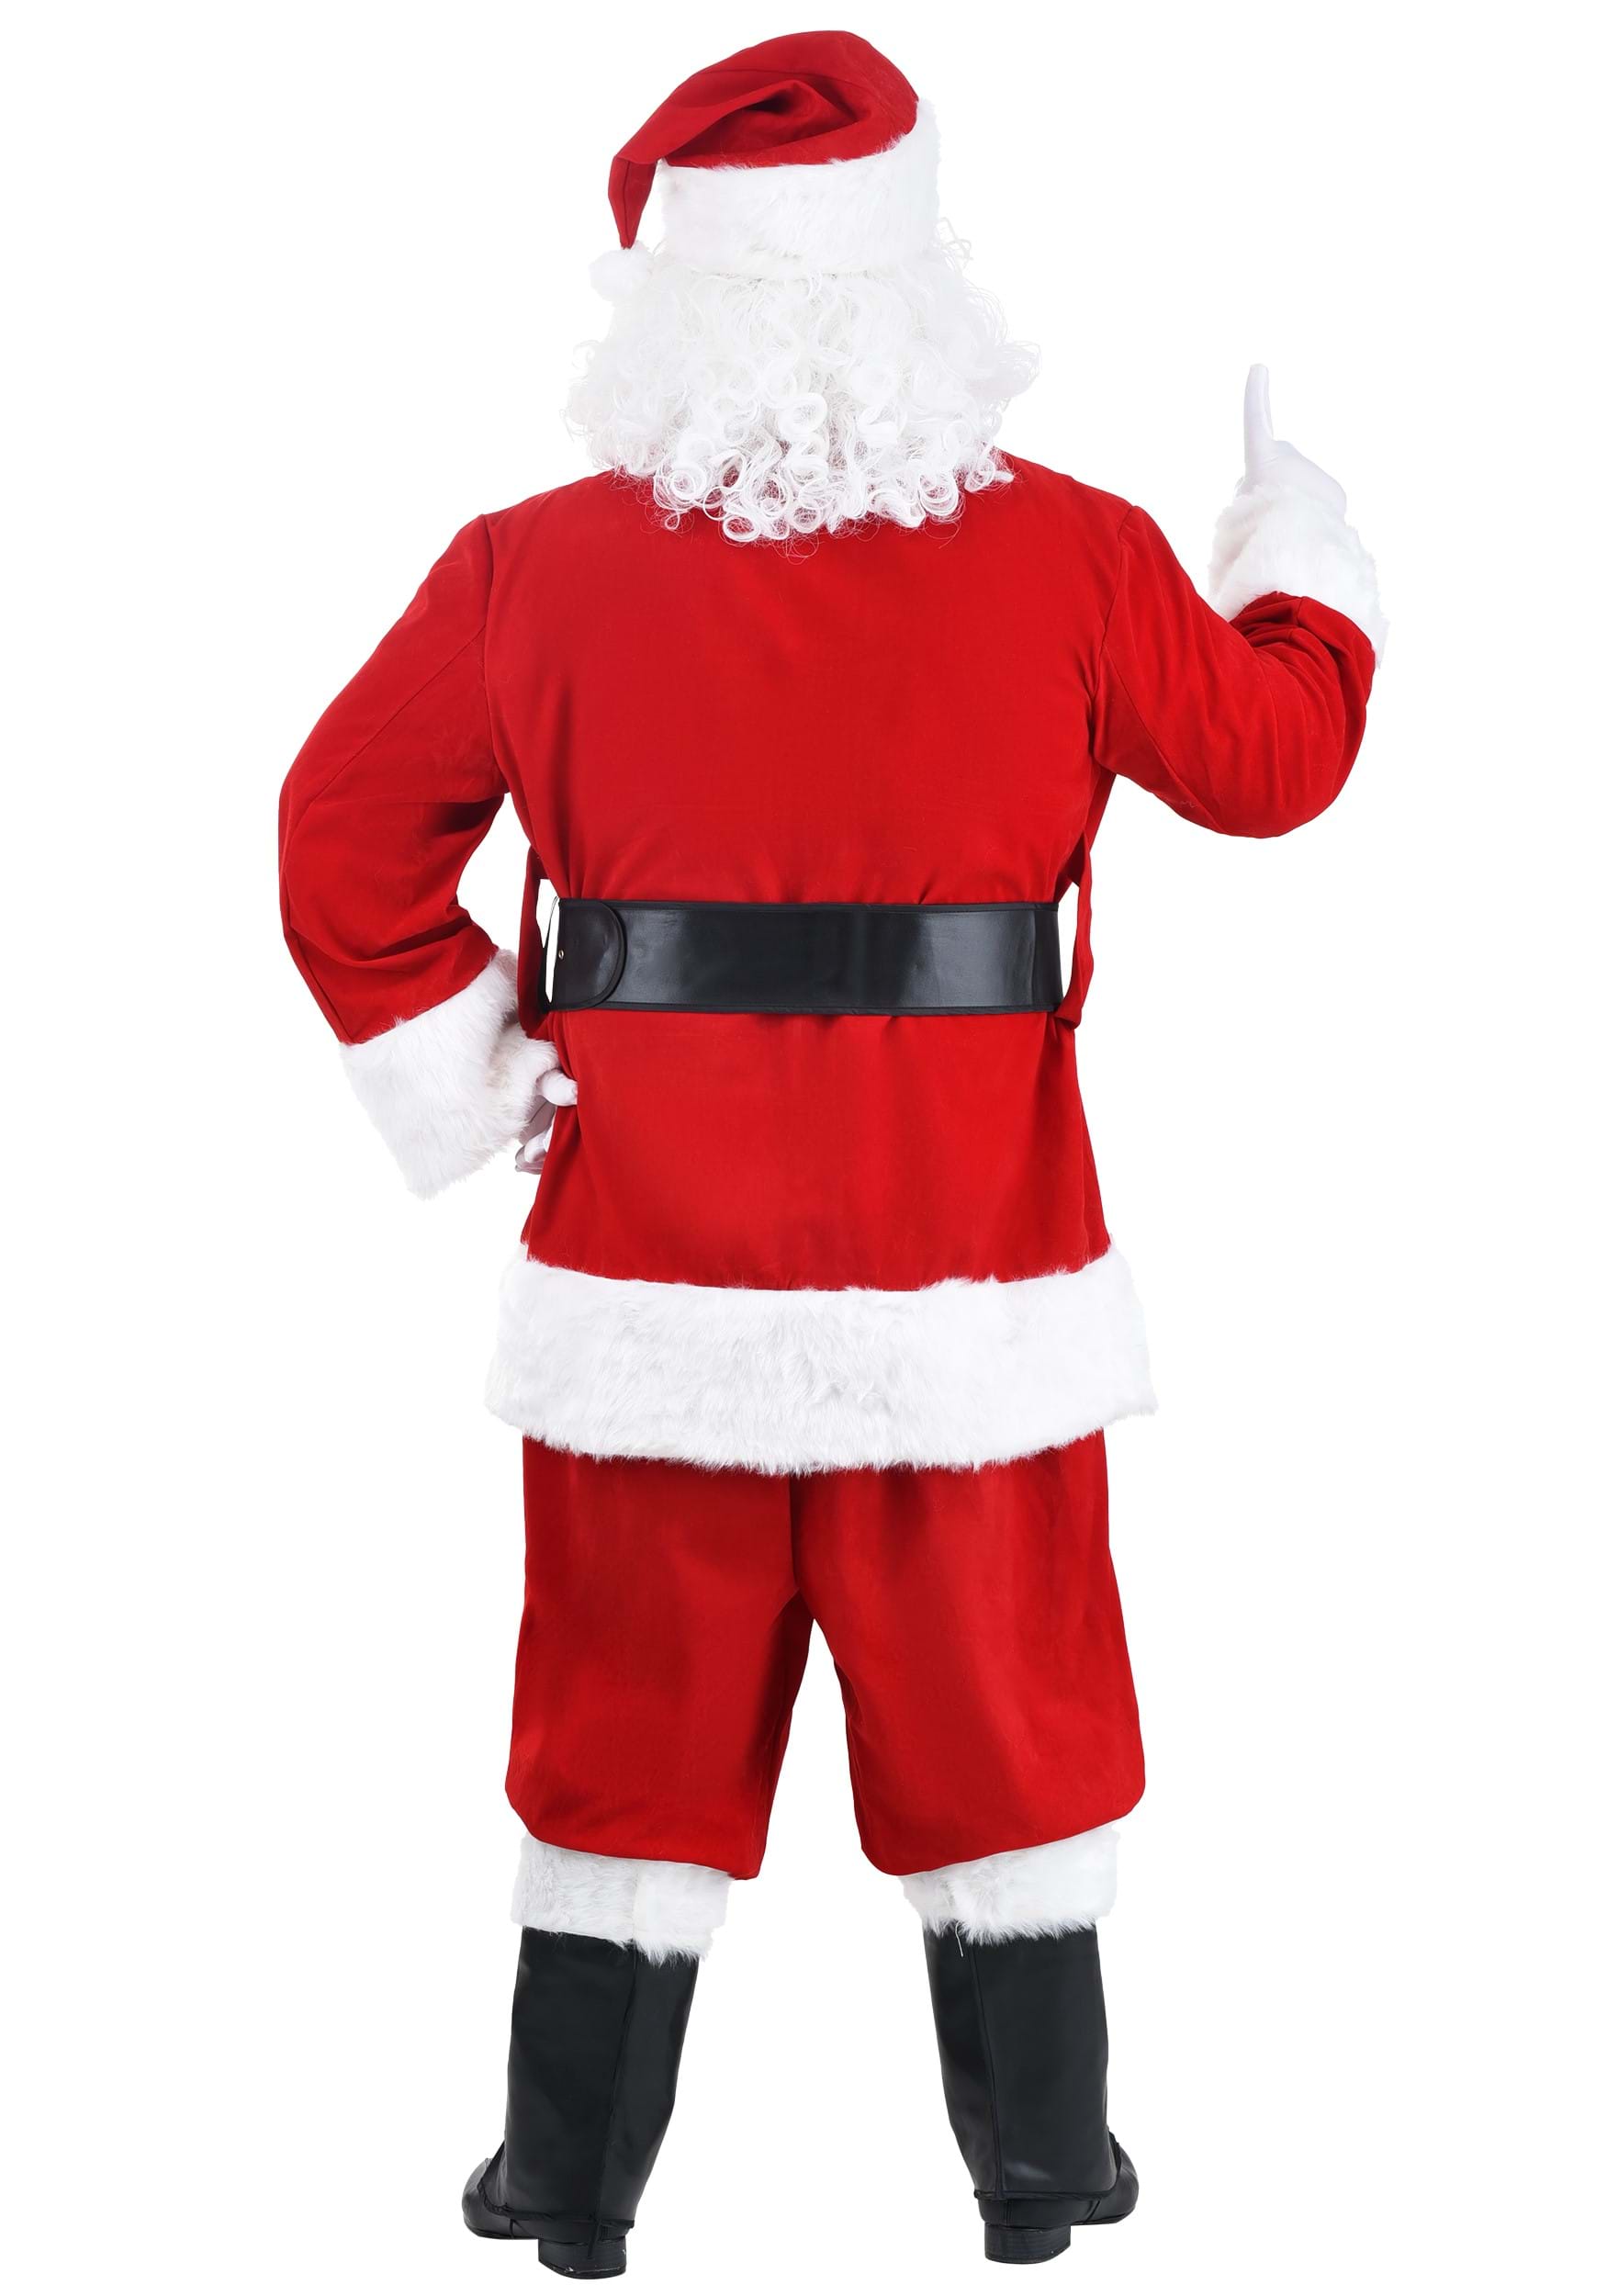 Baonmy Christmas Grinch Santa Cosplay Costume 7pcs Deluxe Santa Suit Outfit for Cosplay Unisex 